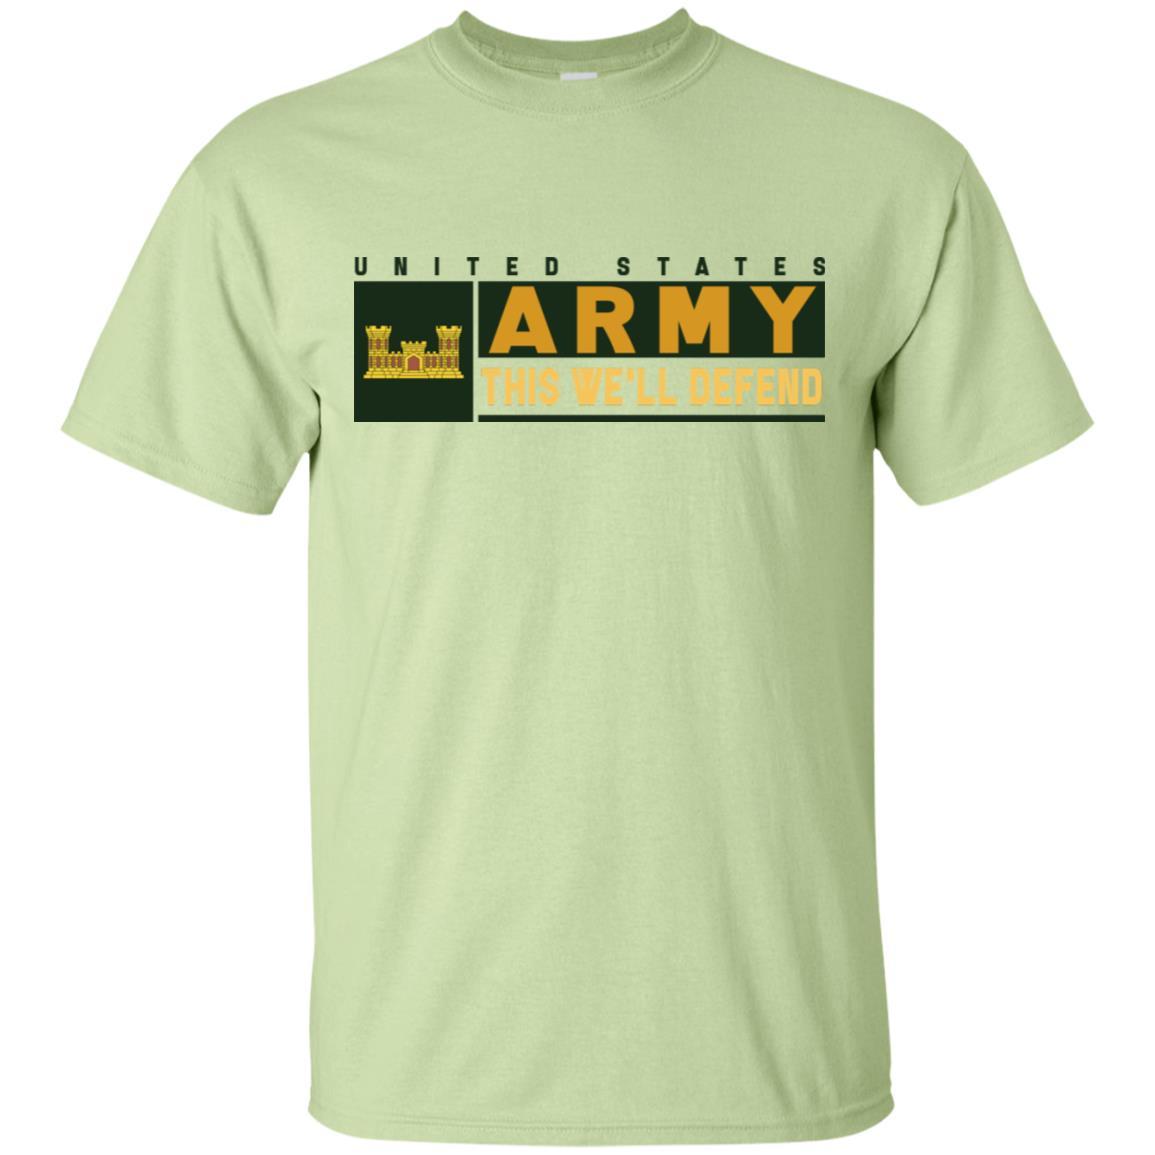 U.S. Army Corps of Engineers- This We'll Defend T-Shirt On Front For Men-TShirt-Army-Veterans Nation